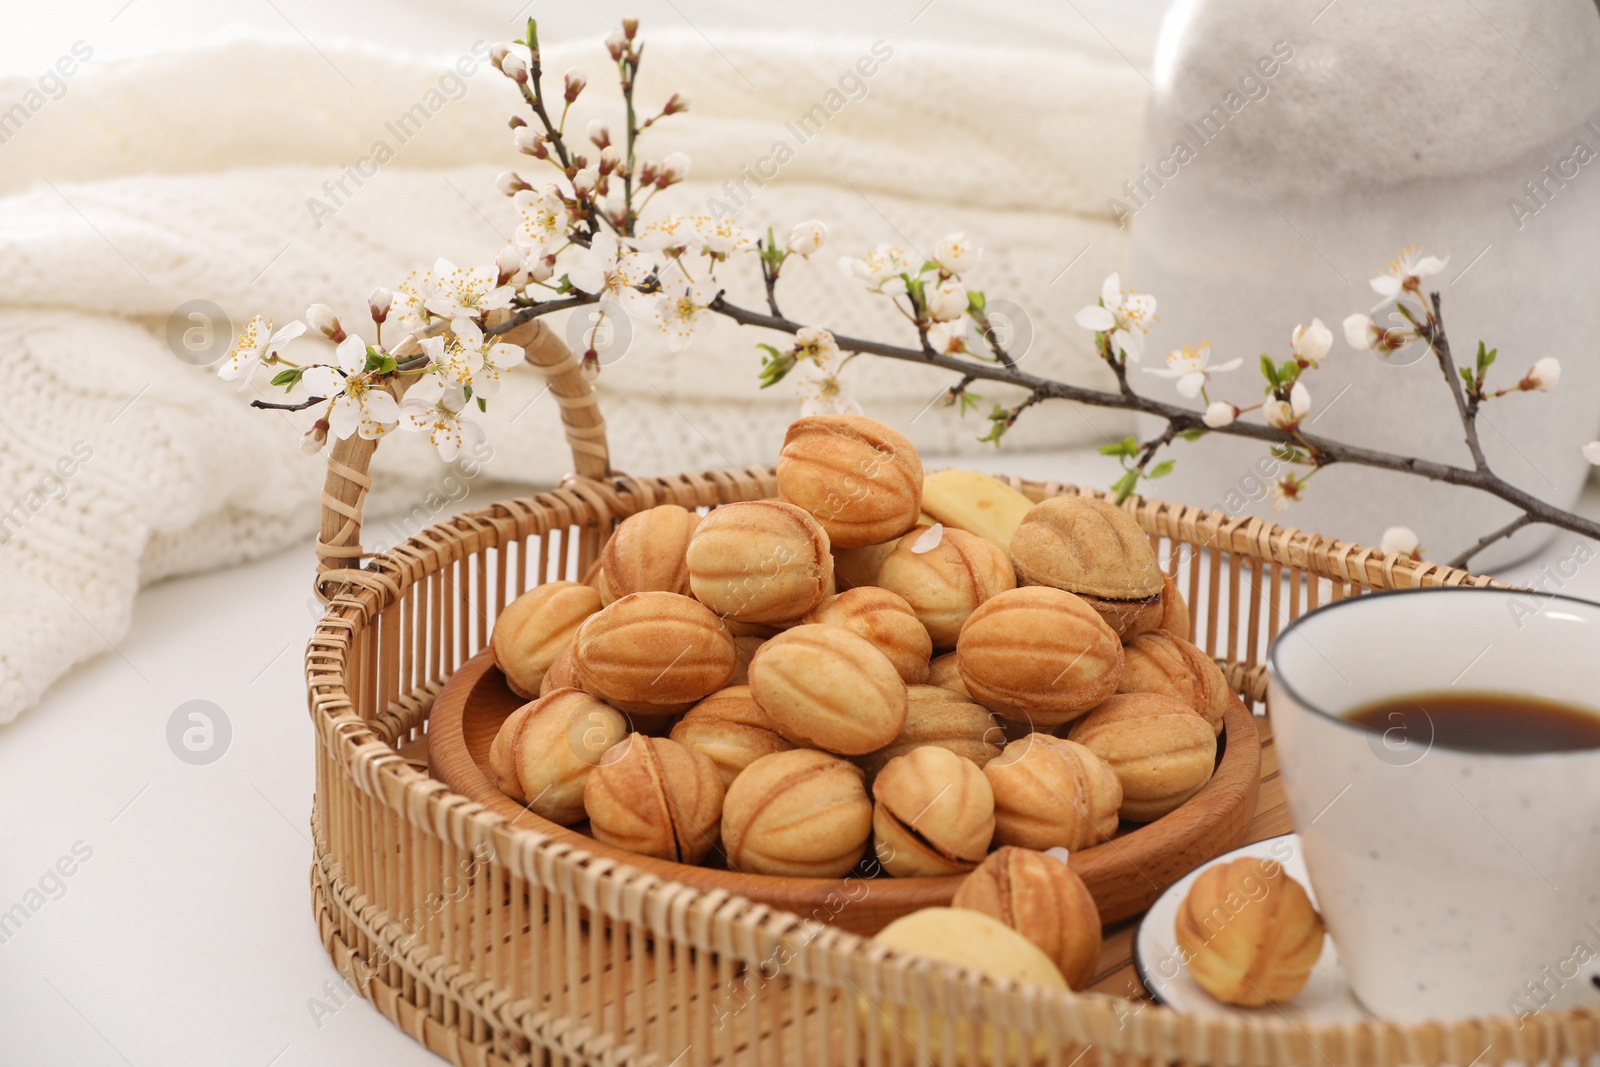 Photo of Delicious walnut shaped cookies with filling, cherry branch and cup of coffee on white table. Homemade popular biscuits from childhood